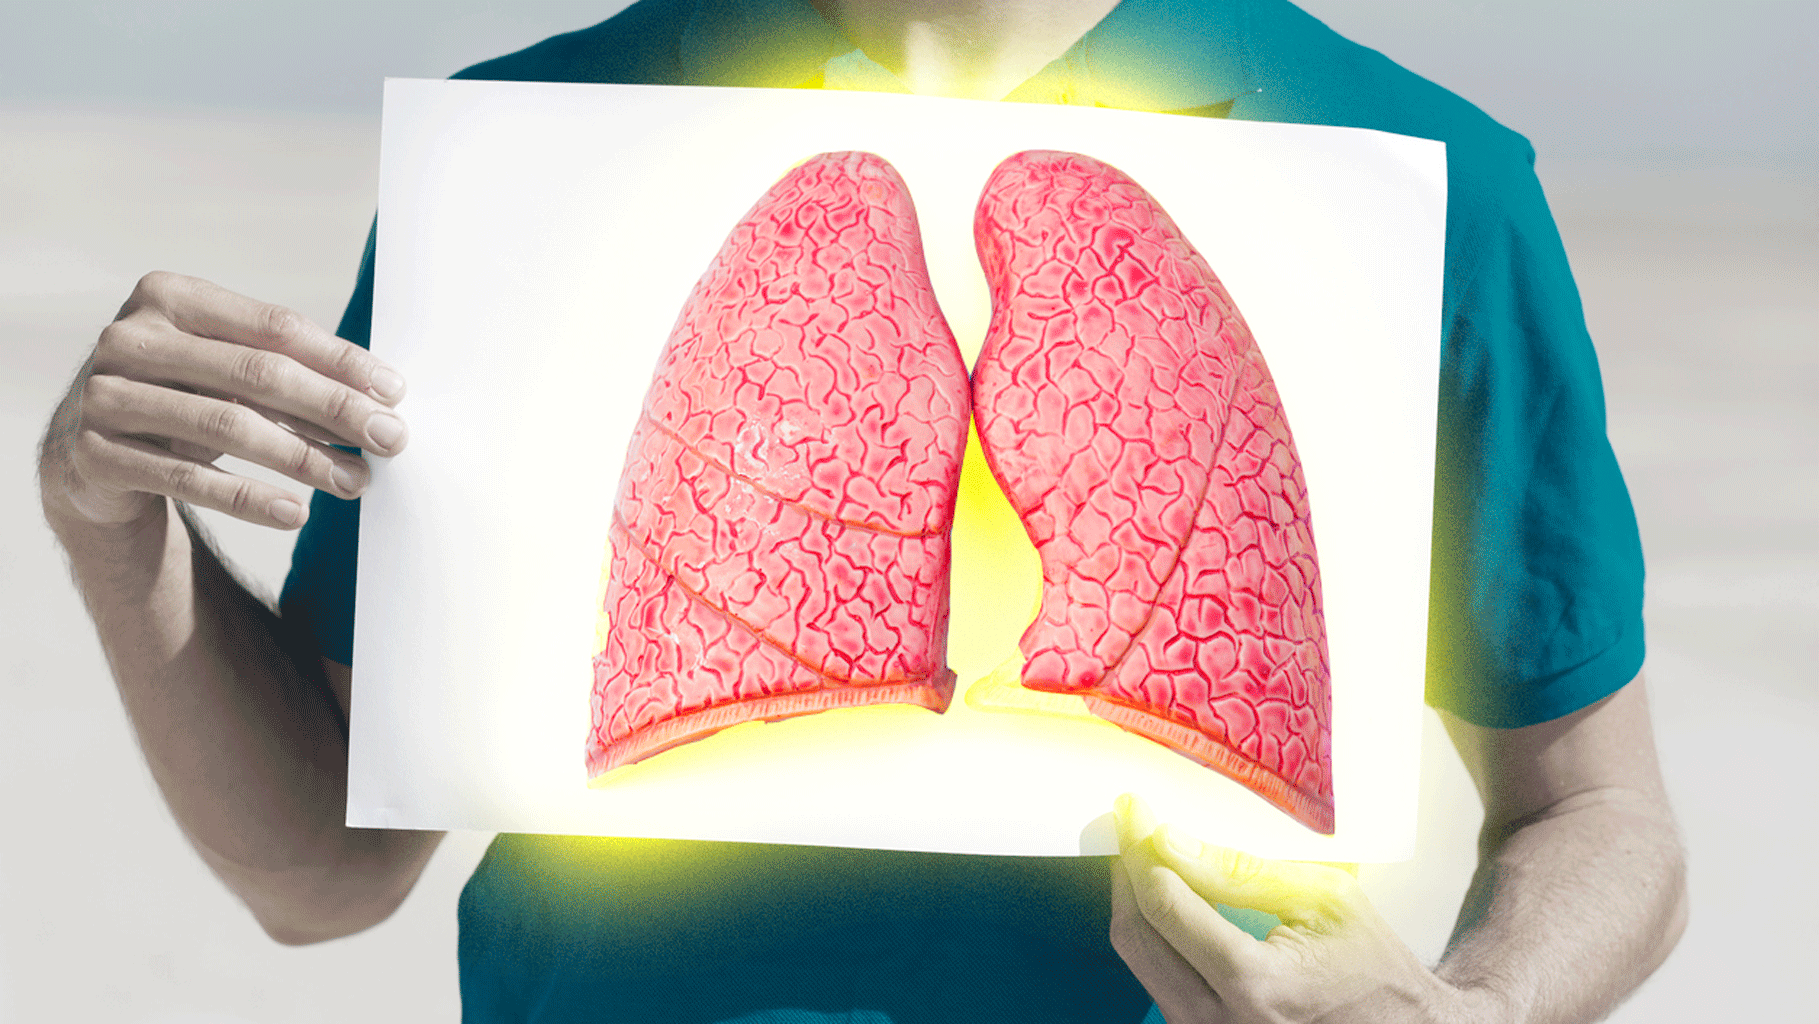 Nearly 15% of all lung cancers happen to those who’ve never smoked in their life. Is it just a stroke of luck or genes gone amok? (Photo: iStock altered by <b><i>The Quint</i></b>)